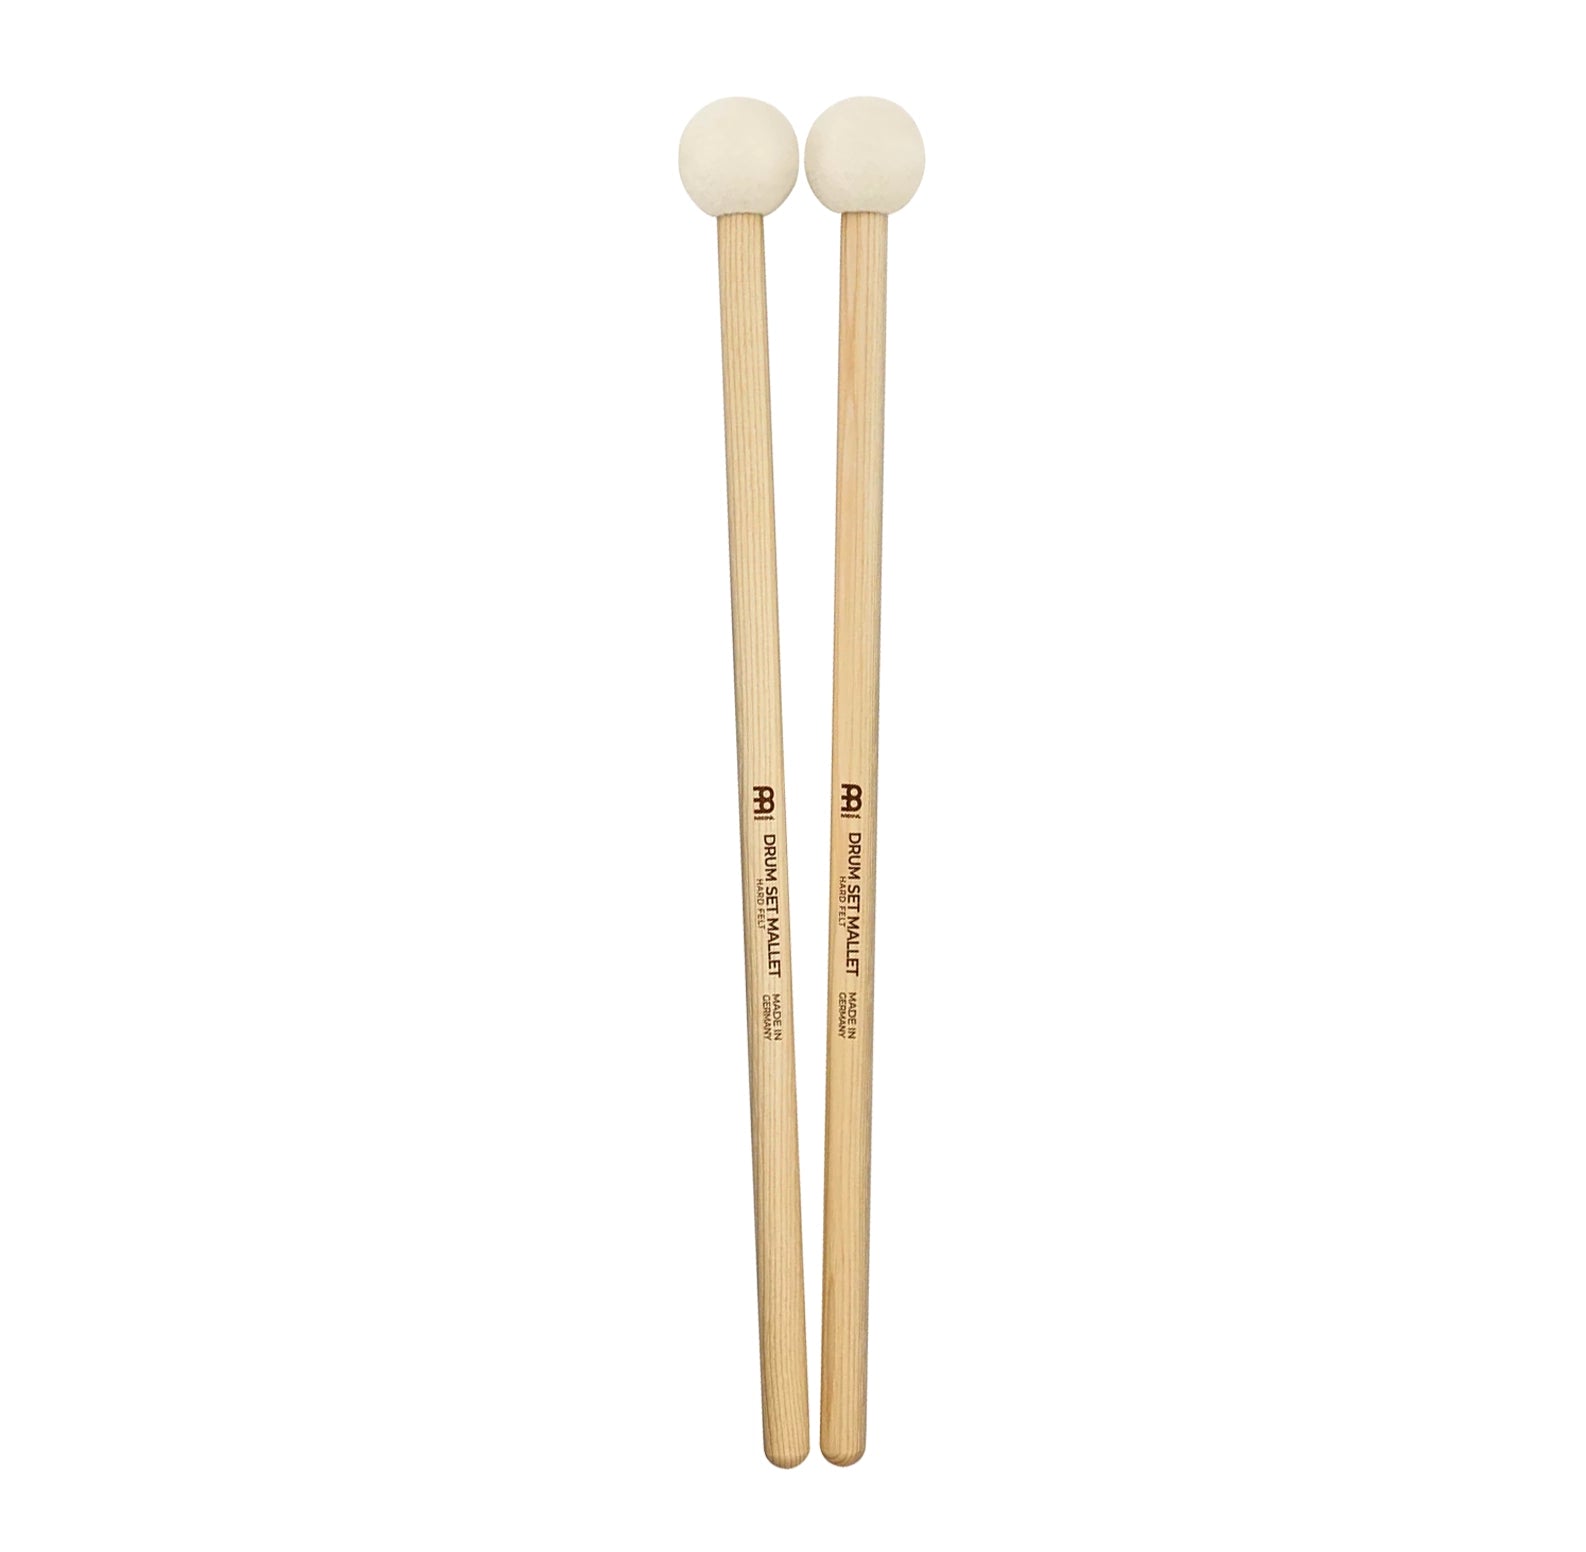 Meinl Stick & Brush Drum Set Mallet with 5A Hickory Drumstick Handles- Hard